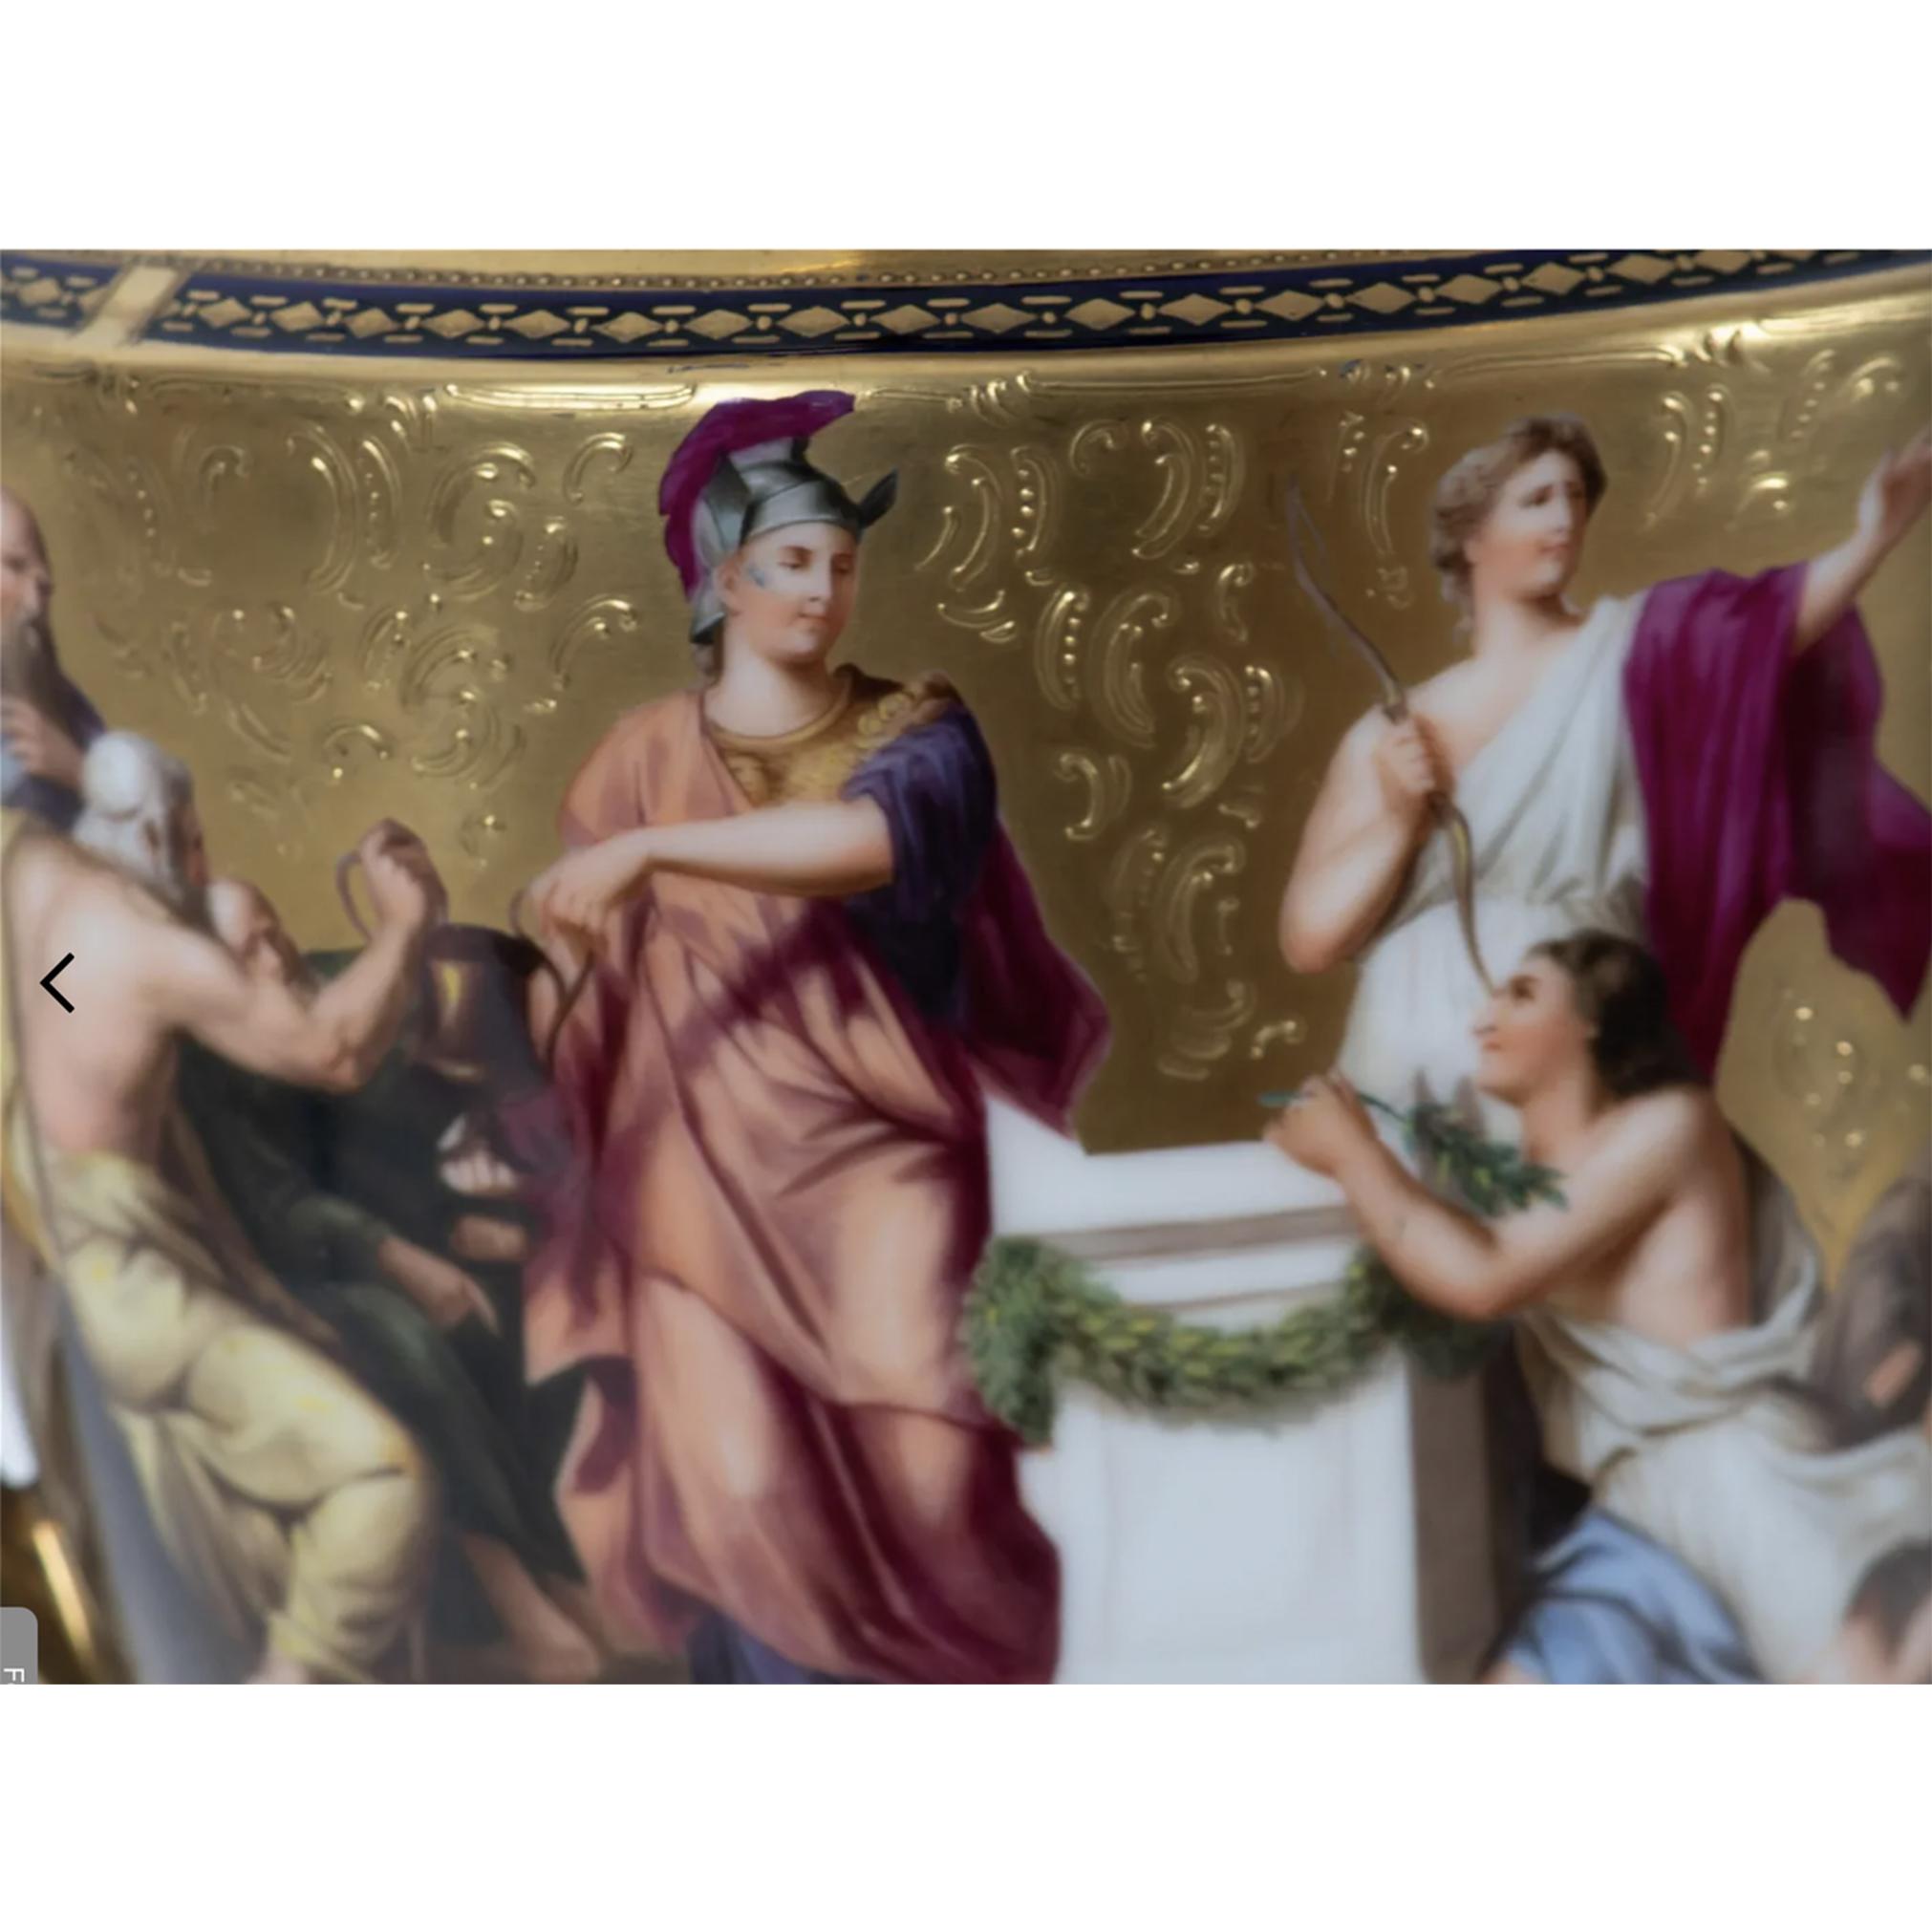 A Fine Royal Vienna Porcelain Urn. The belly of the urn depicts an unknown scene of a man in purple nobility robes, standing before a podium as a group offer him a box and a goat to be sacrificed and more. Elaborate gilded painting throughout with